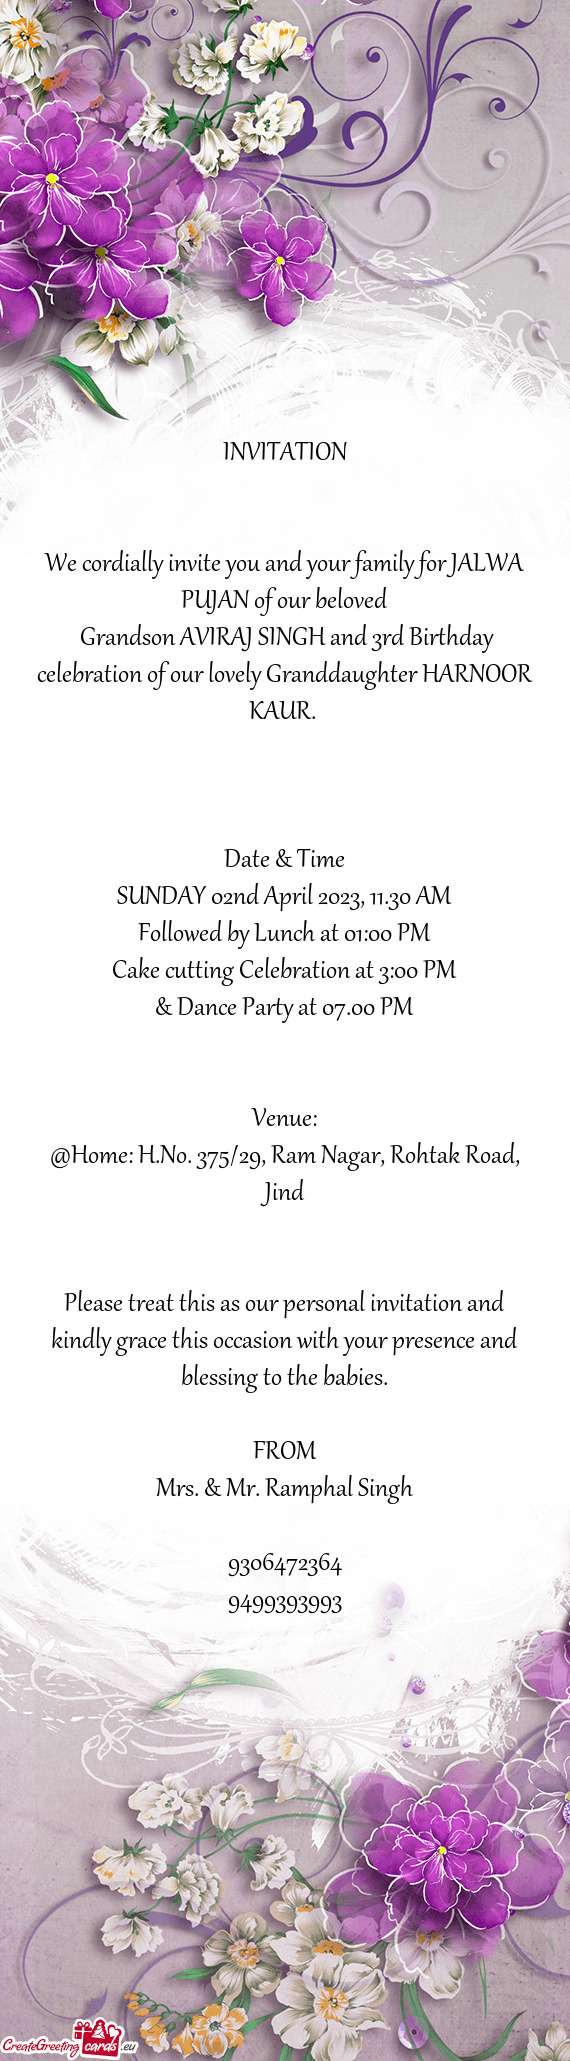 We cordially invite you and your family for JALWA PUJAN of our beloved